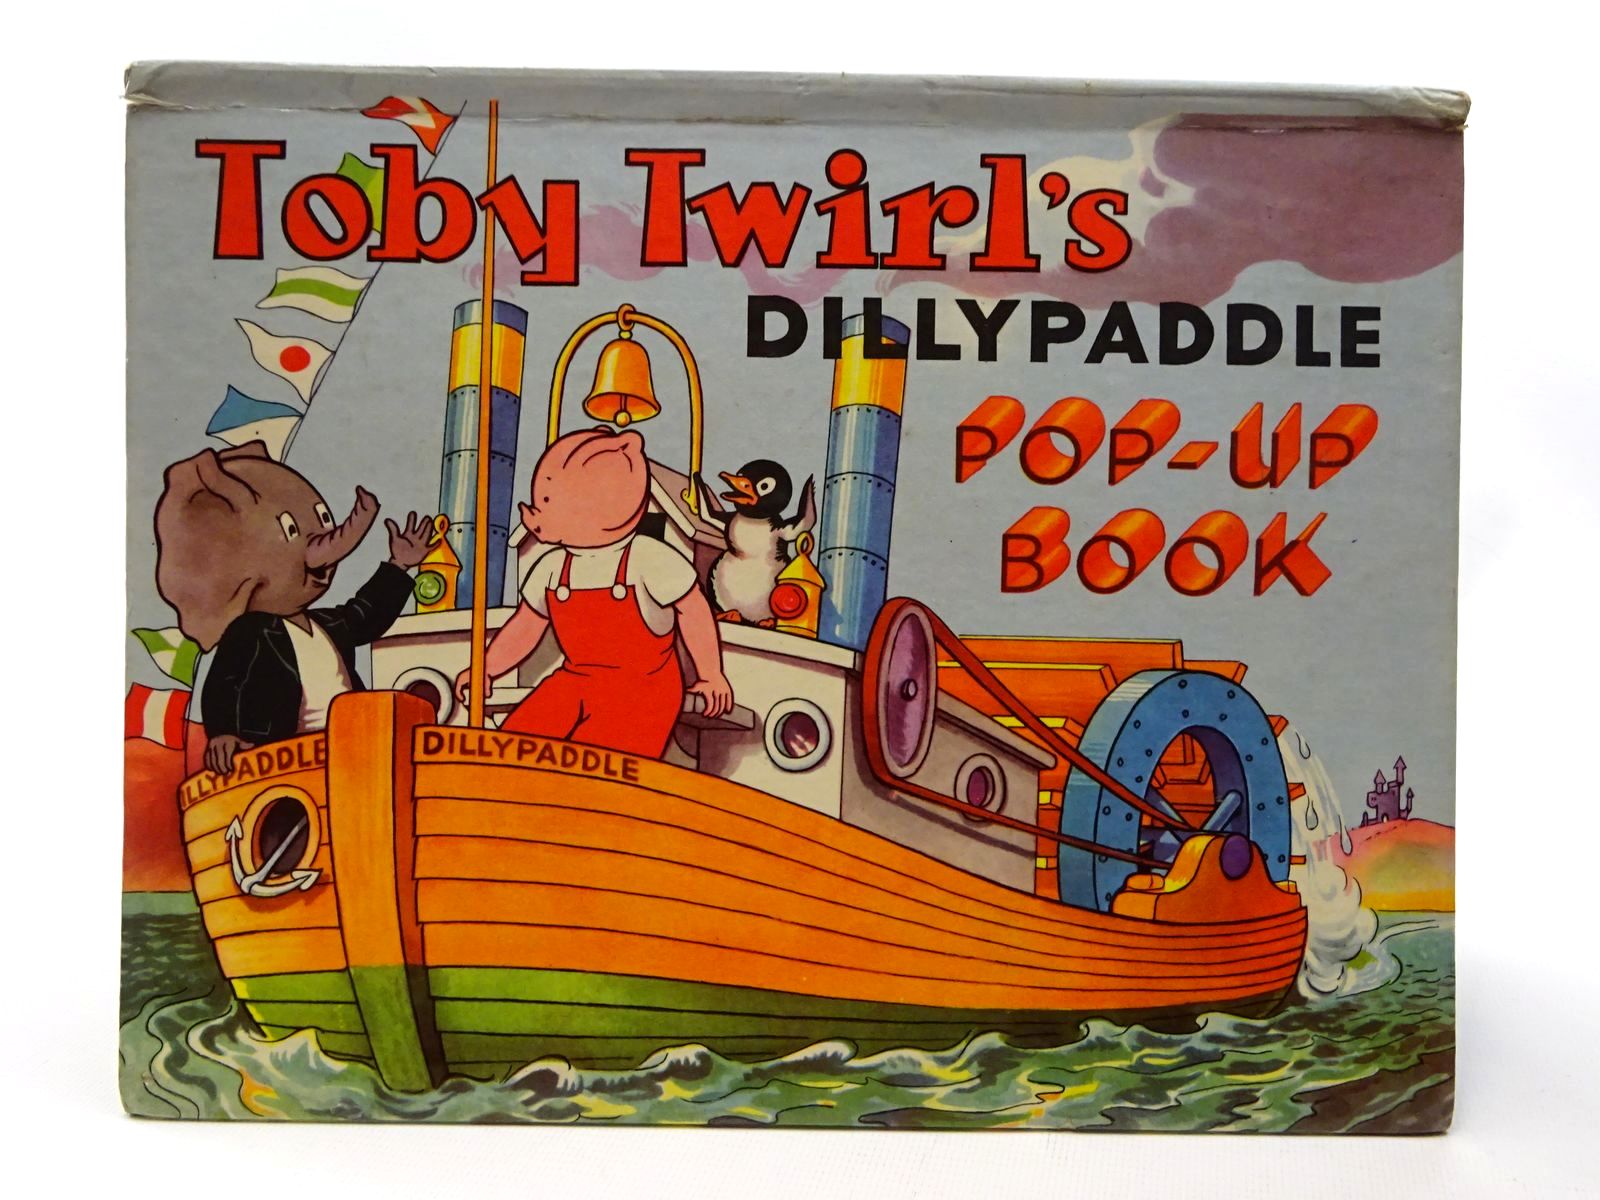 Photo of TOBY TWIRL'S DILLYPADDLE POP-UP BOOK published by Sampson Low (STOCK CODE: 2124277)  for sale by Stella & Rose's Books